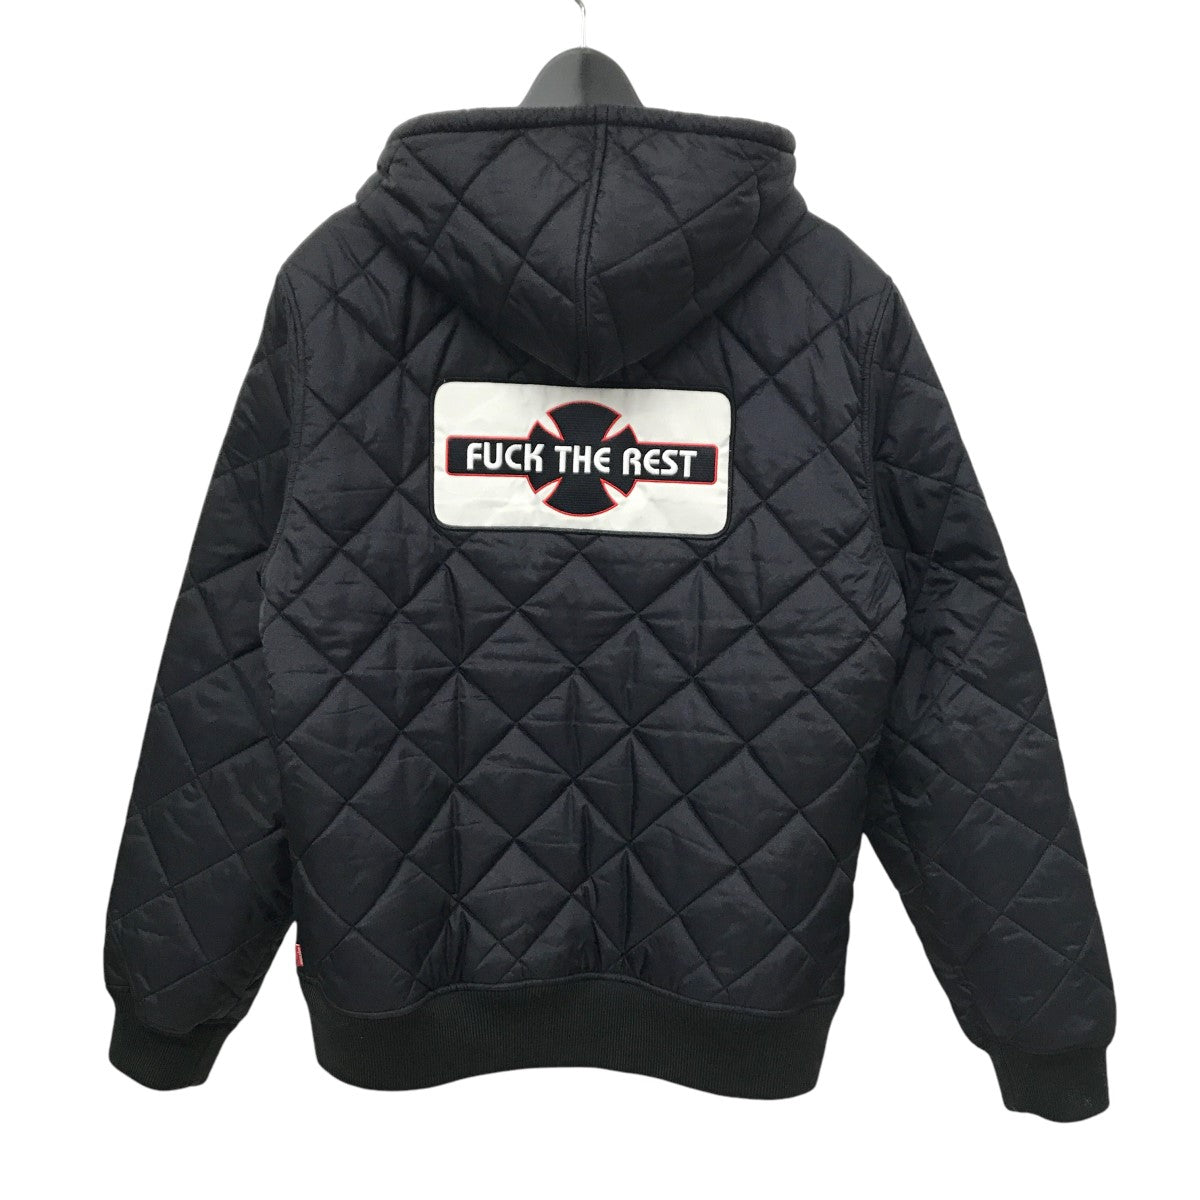 Supreme×Independent 15AW Quilted Nylon Jacket キルティング ...